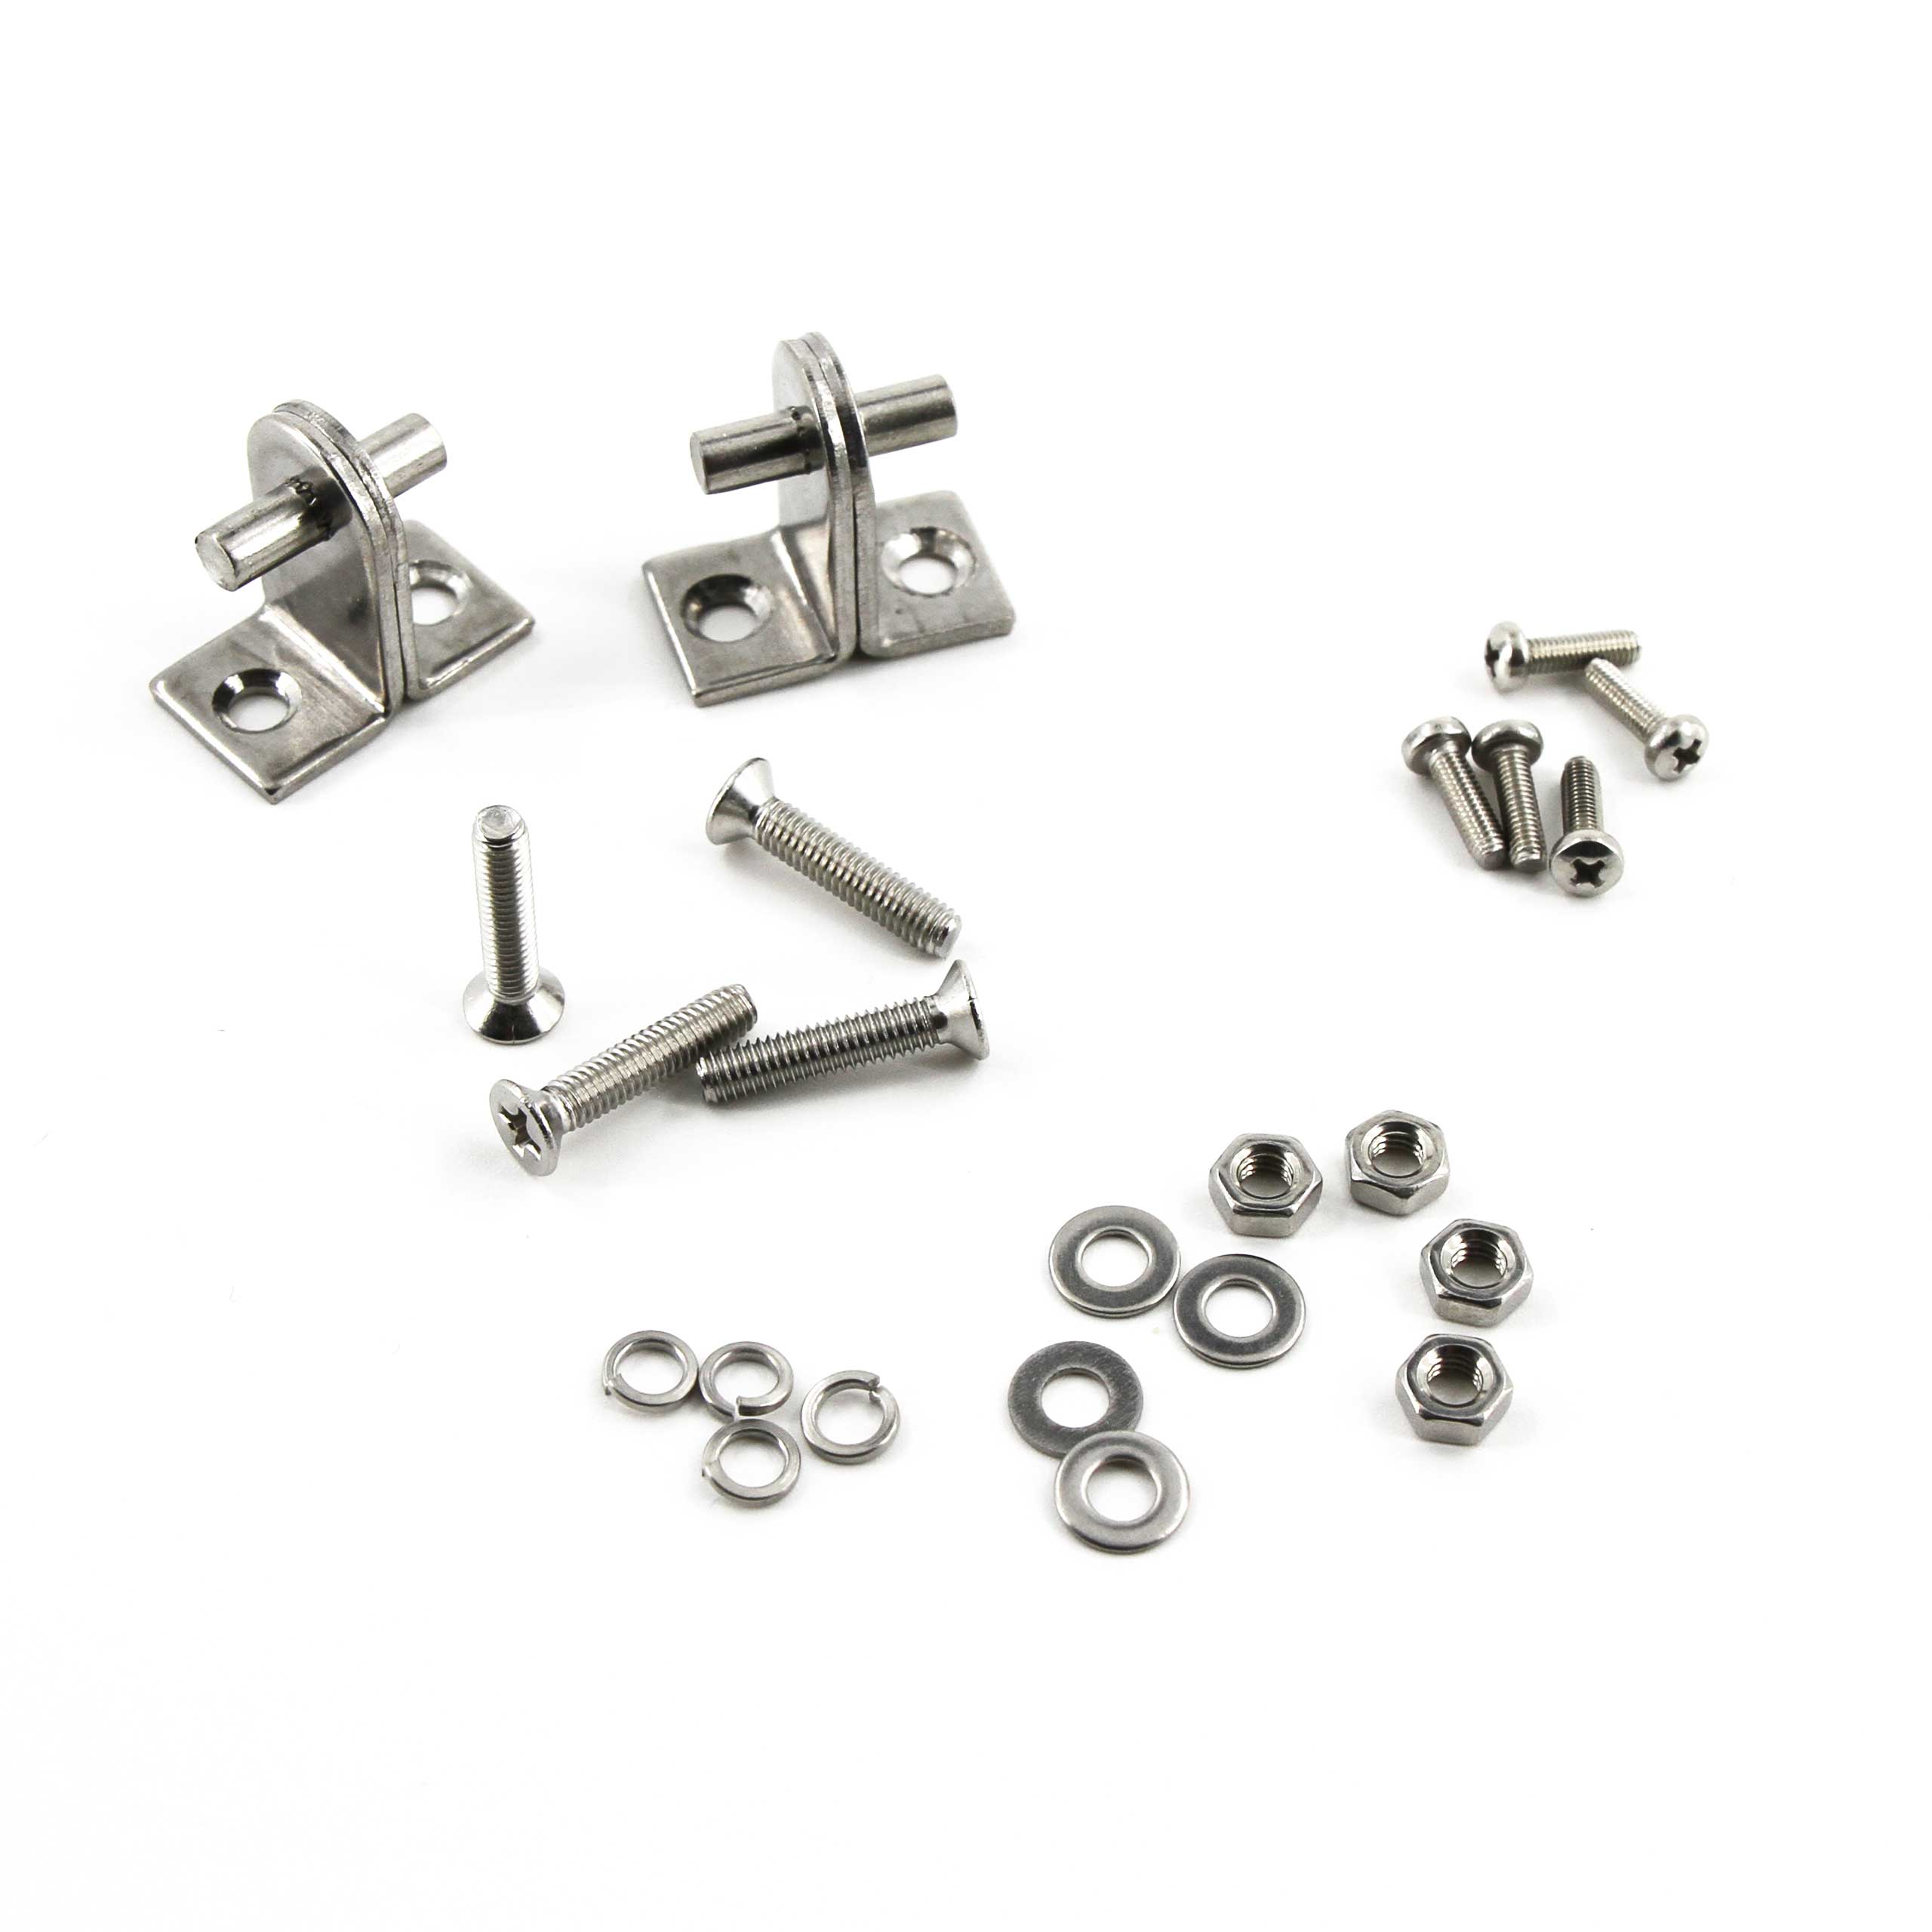 Mount and screws for Scavenger Carrying Handle